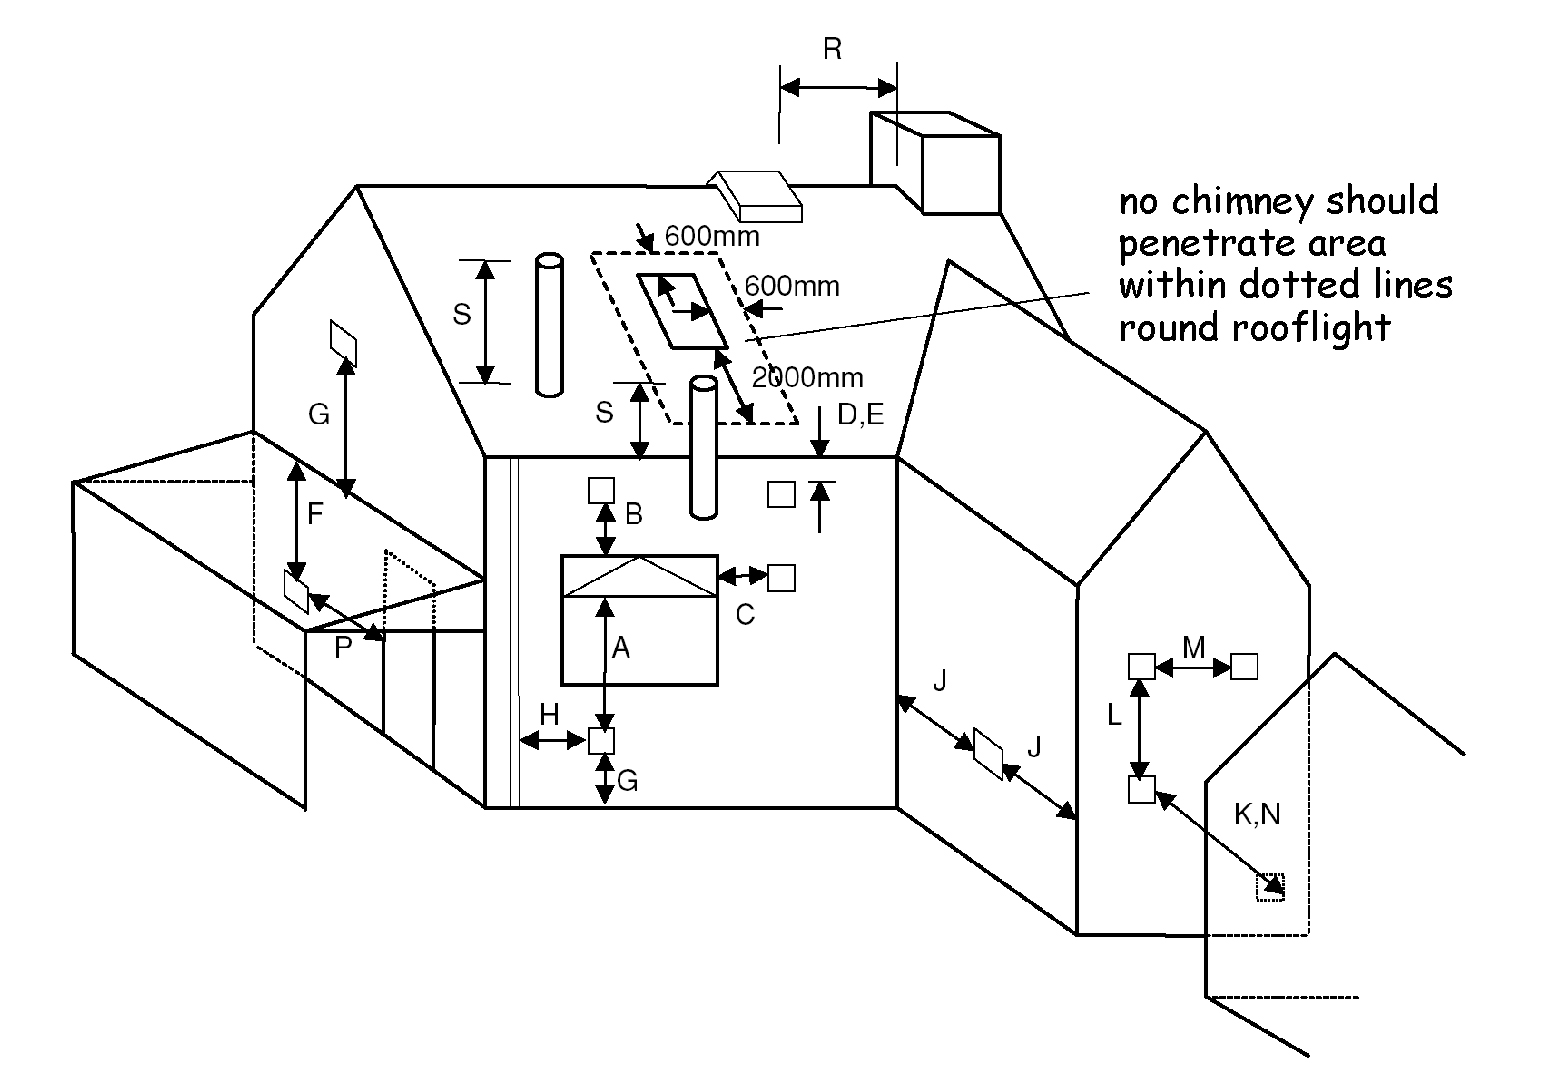 Gas-fired - flue outlets